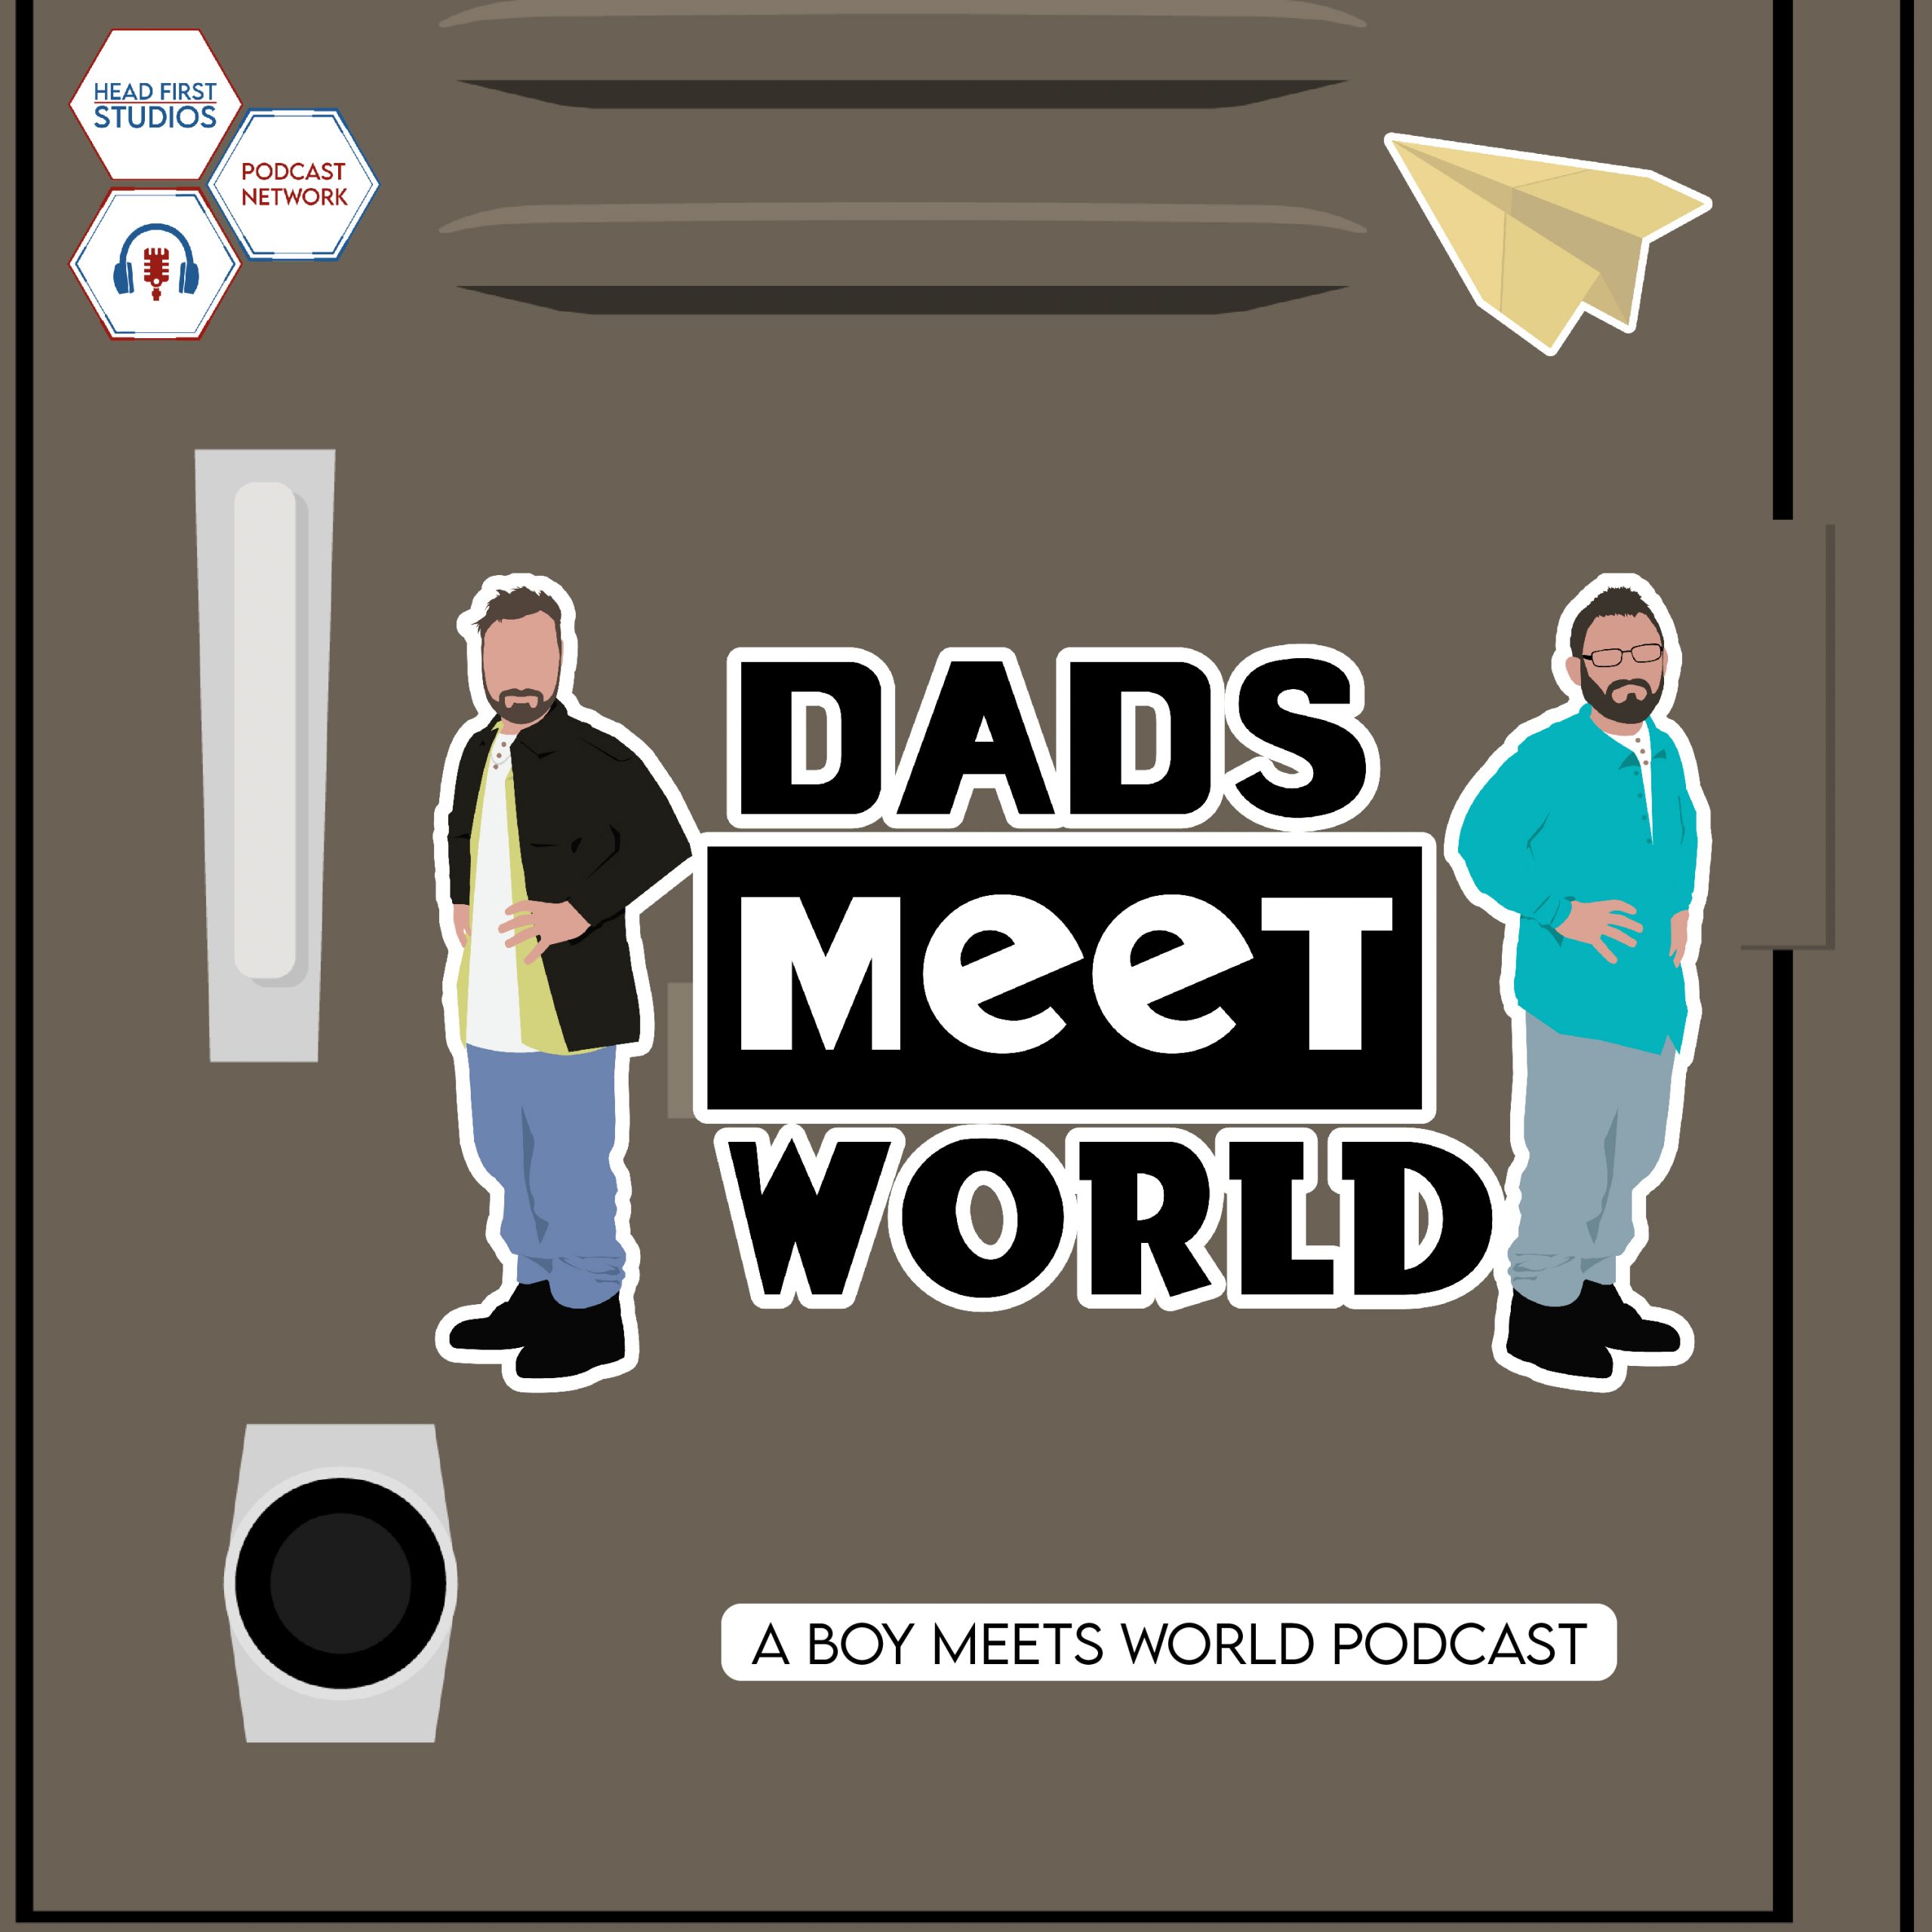 Caricatures of two dads stand on either side of the title of the Dads Meet World podcast.